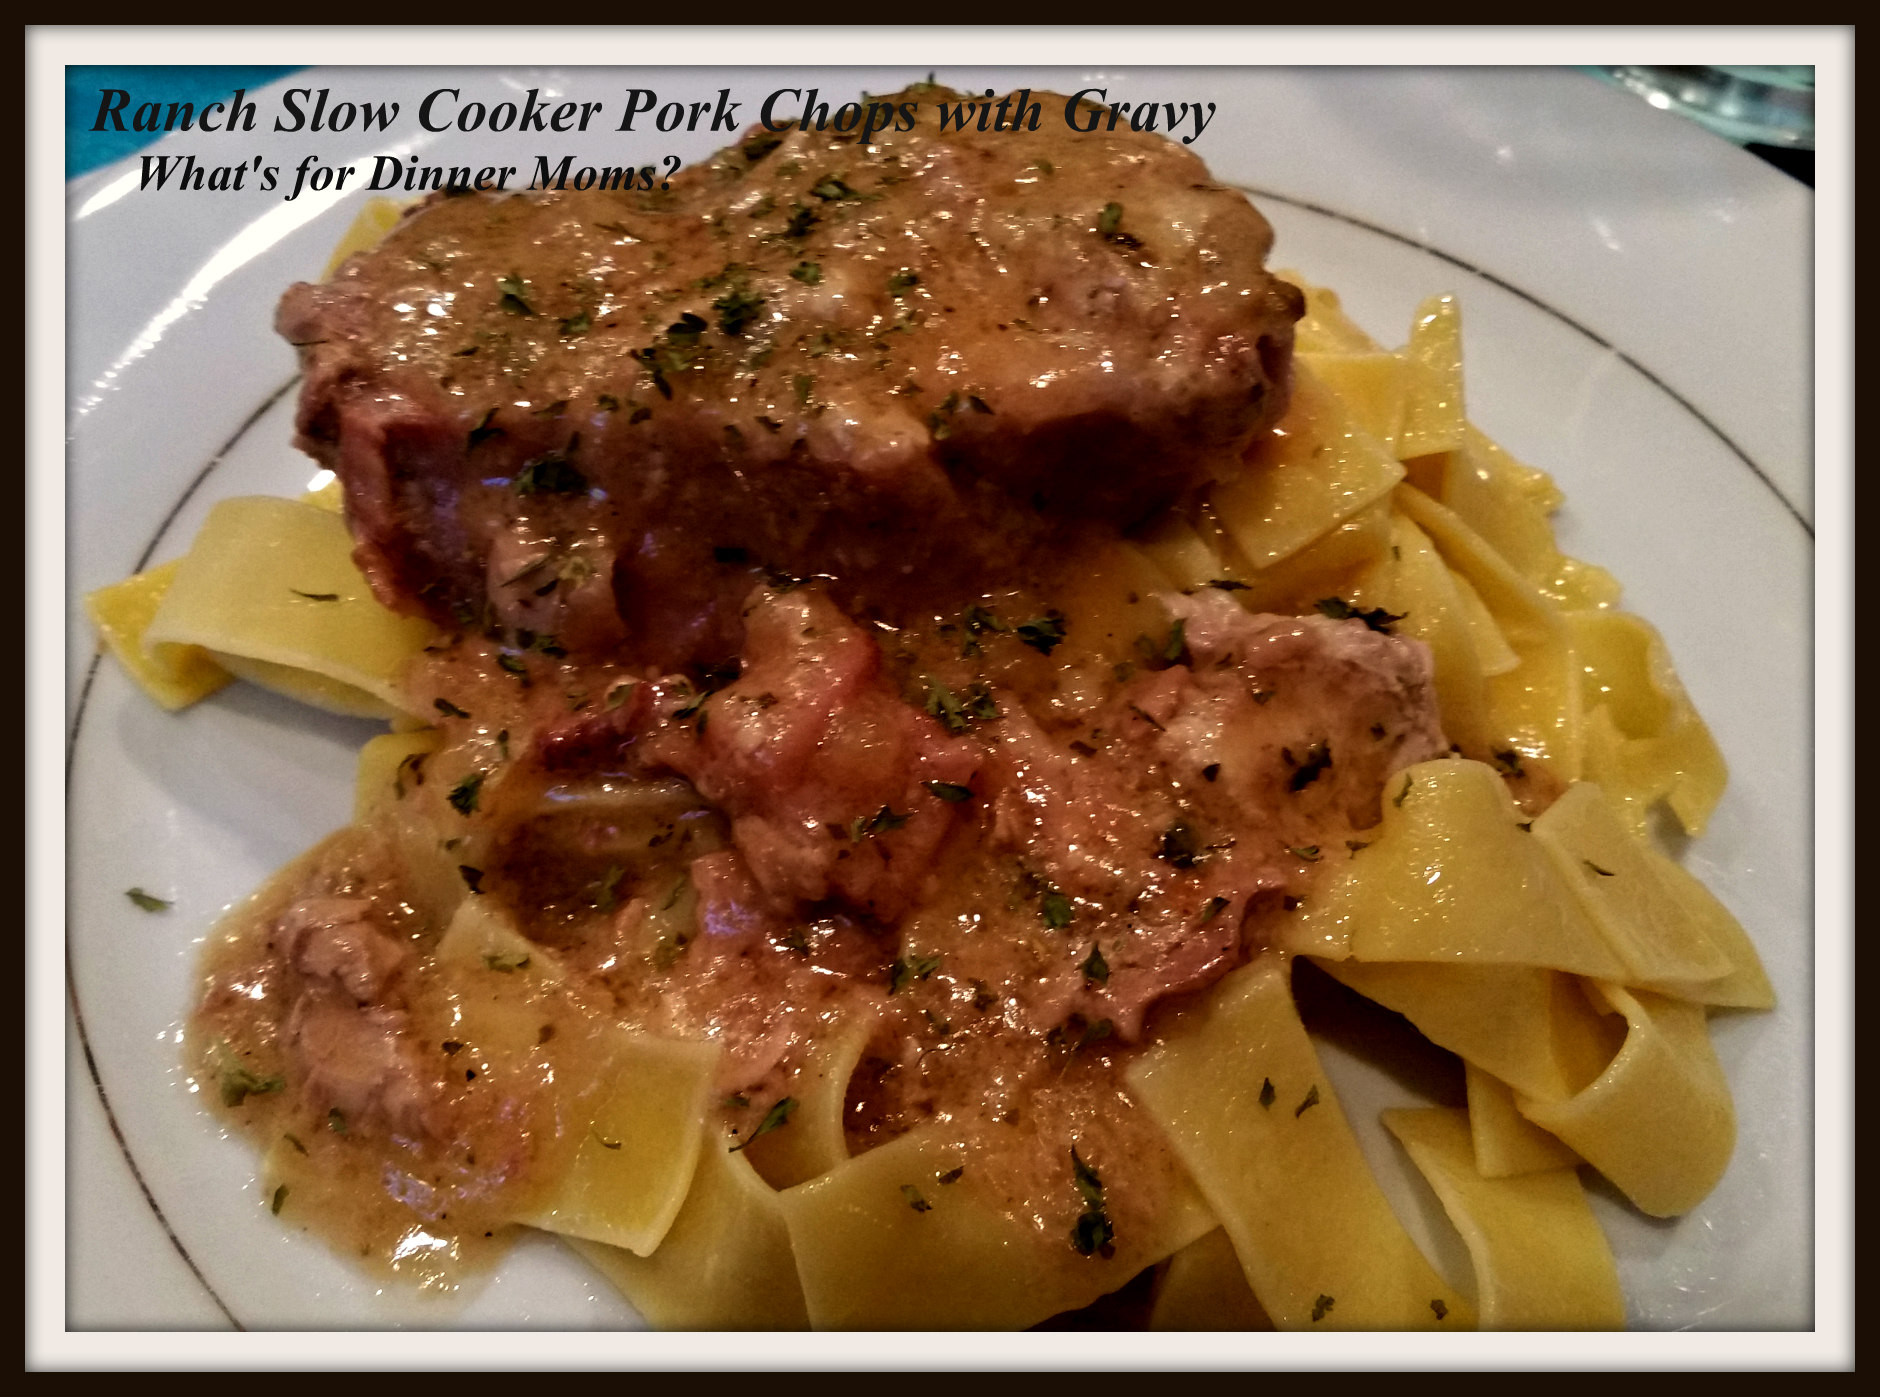 Slow Cooker Pork Chops And Gravy
 Ranch Slow Cooker Pork Chops with Gravy No Canned Soups